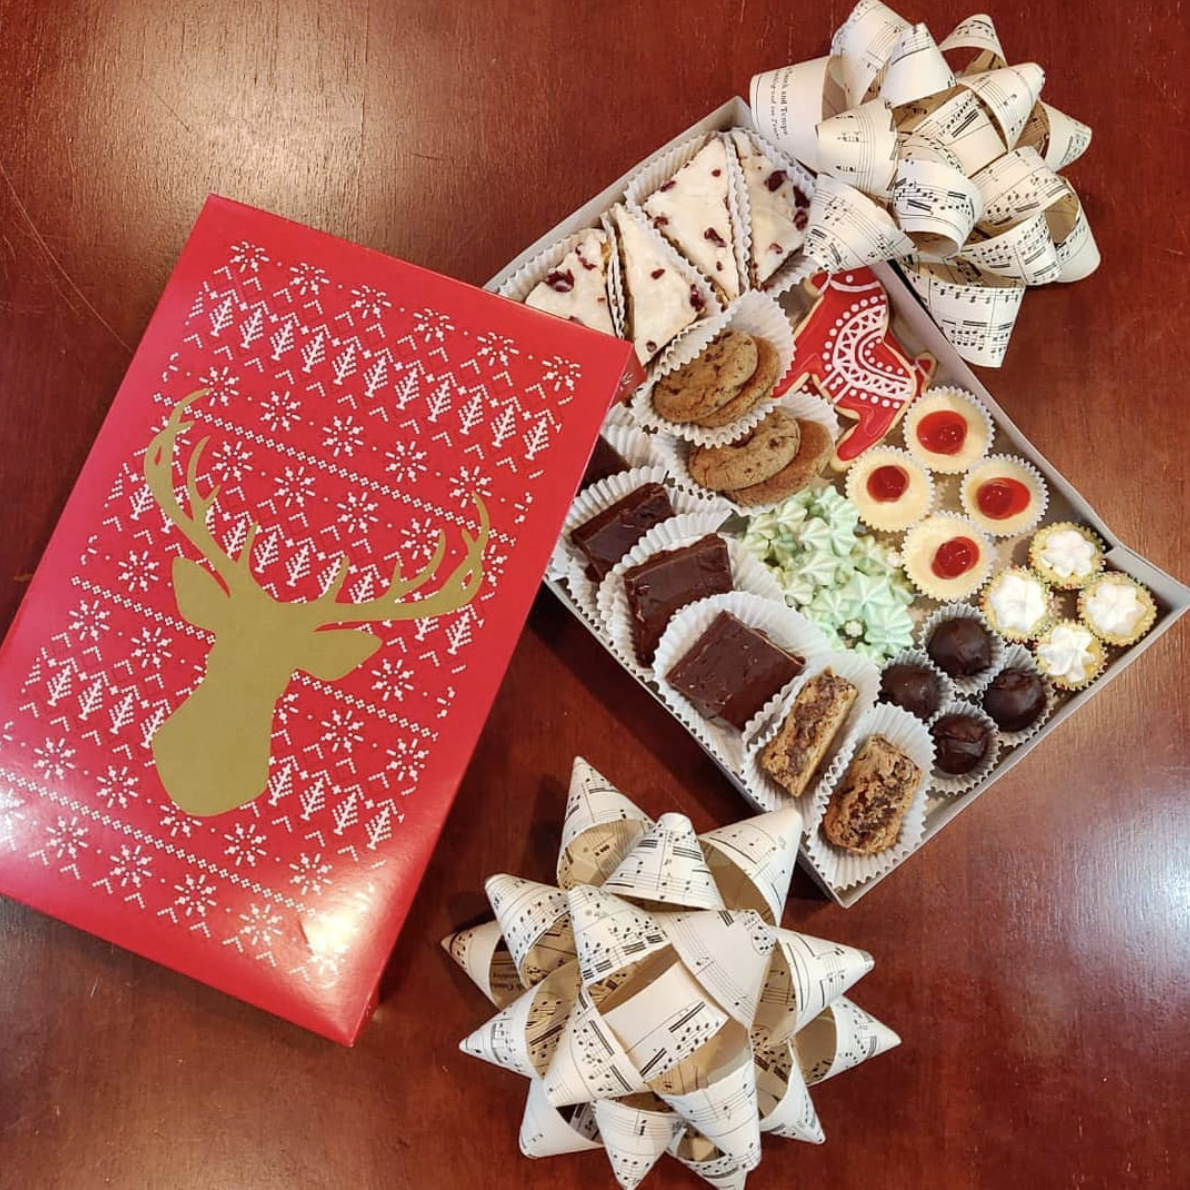 a box of assorted sweets available during the holidays